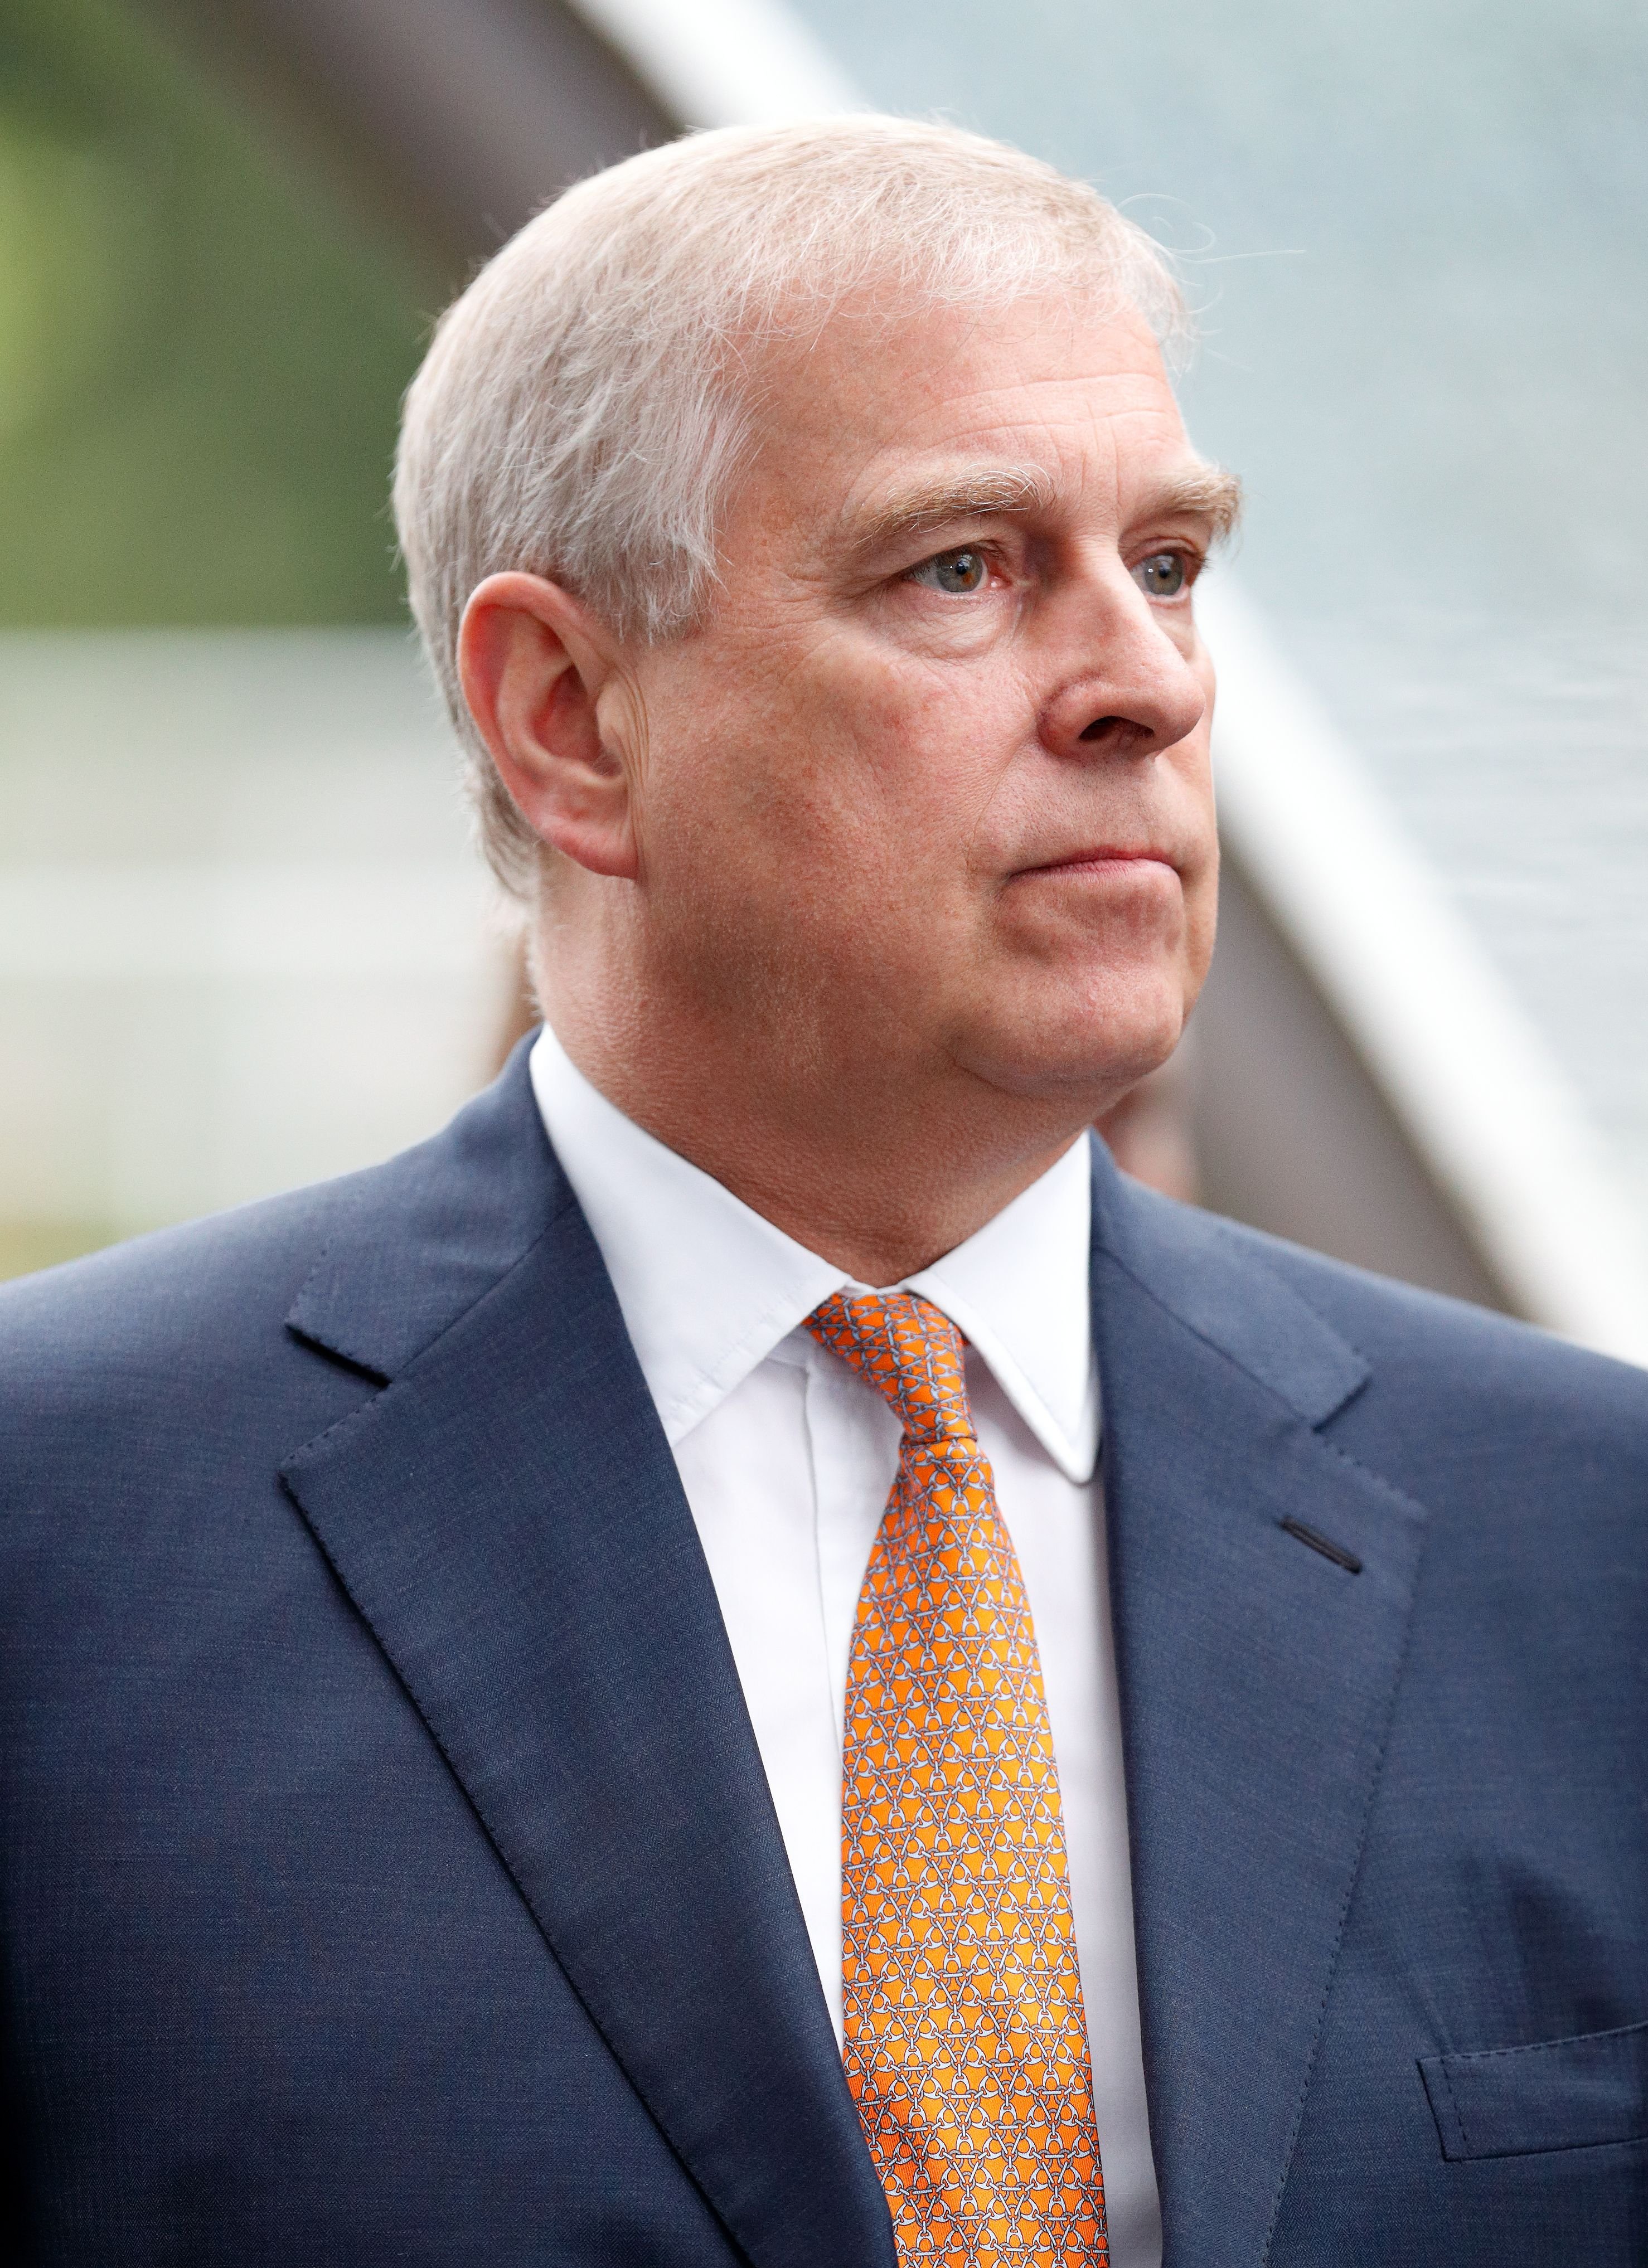 Prince Andrew during the King George VI racing meet at Ascot Racecourse on July 29, 2017 in Ascot, England. | Source: Getty Images